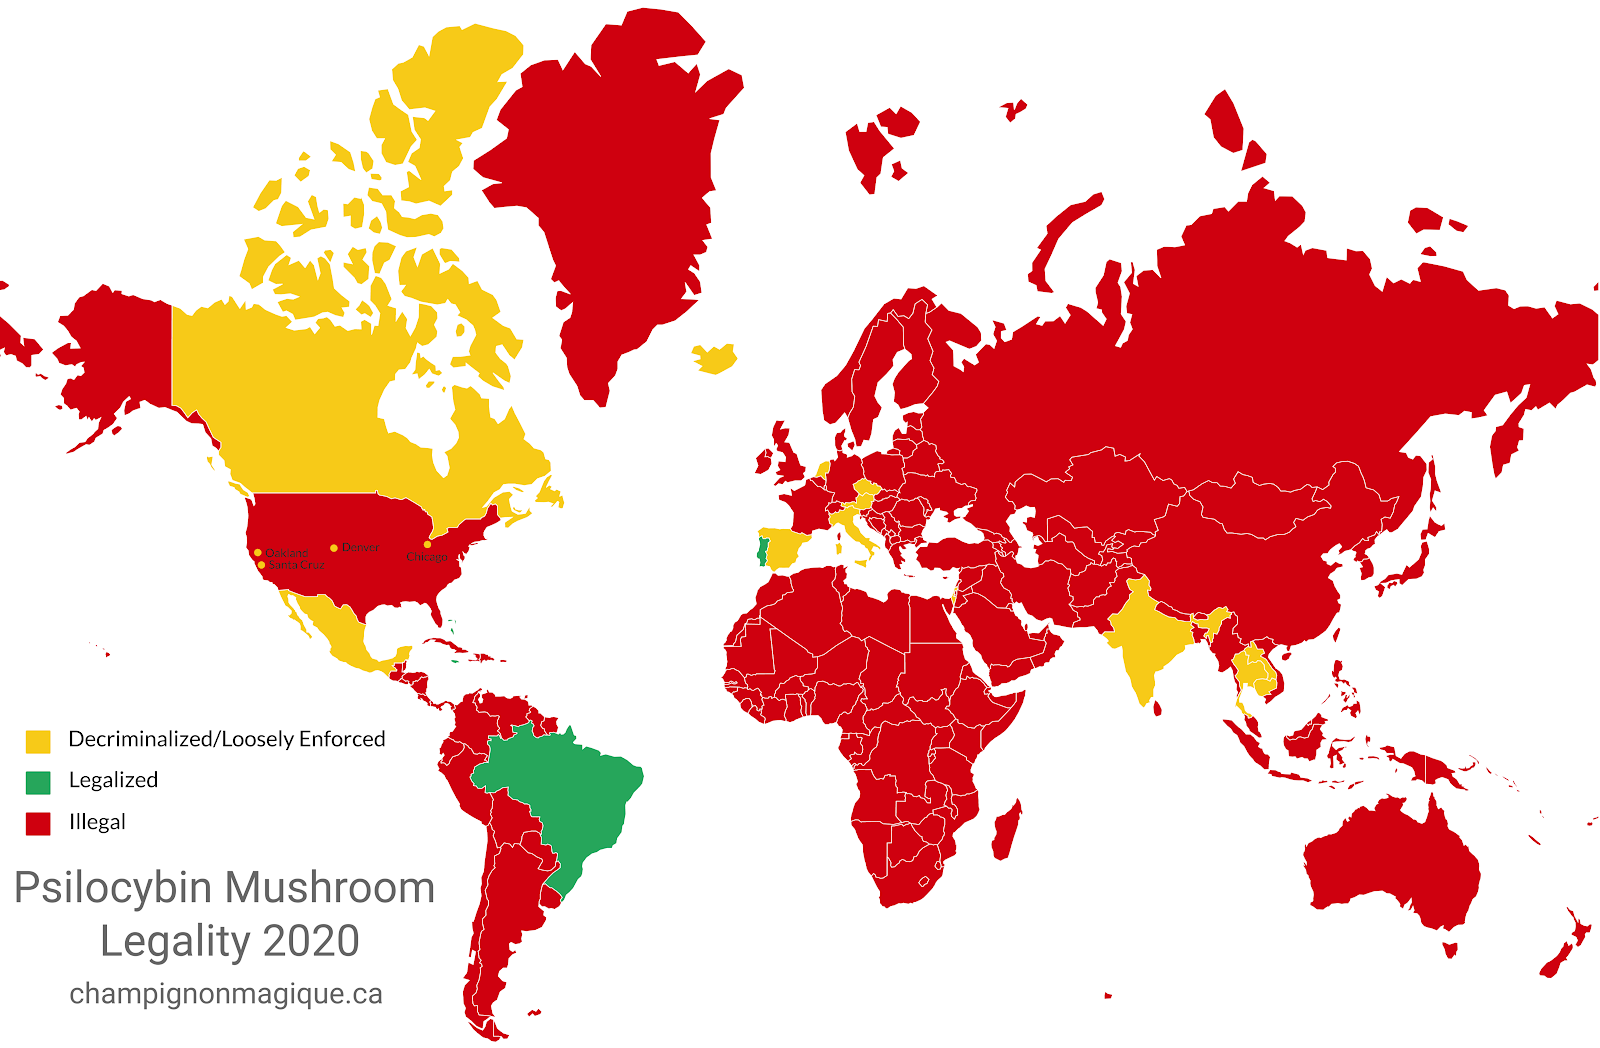 photo of A Global Guide to Where Magic Mushrooms and Psilocybin Are Legal or Decriminalized image